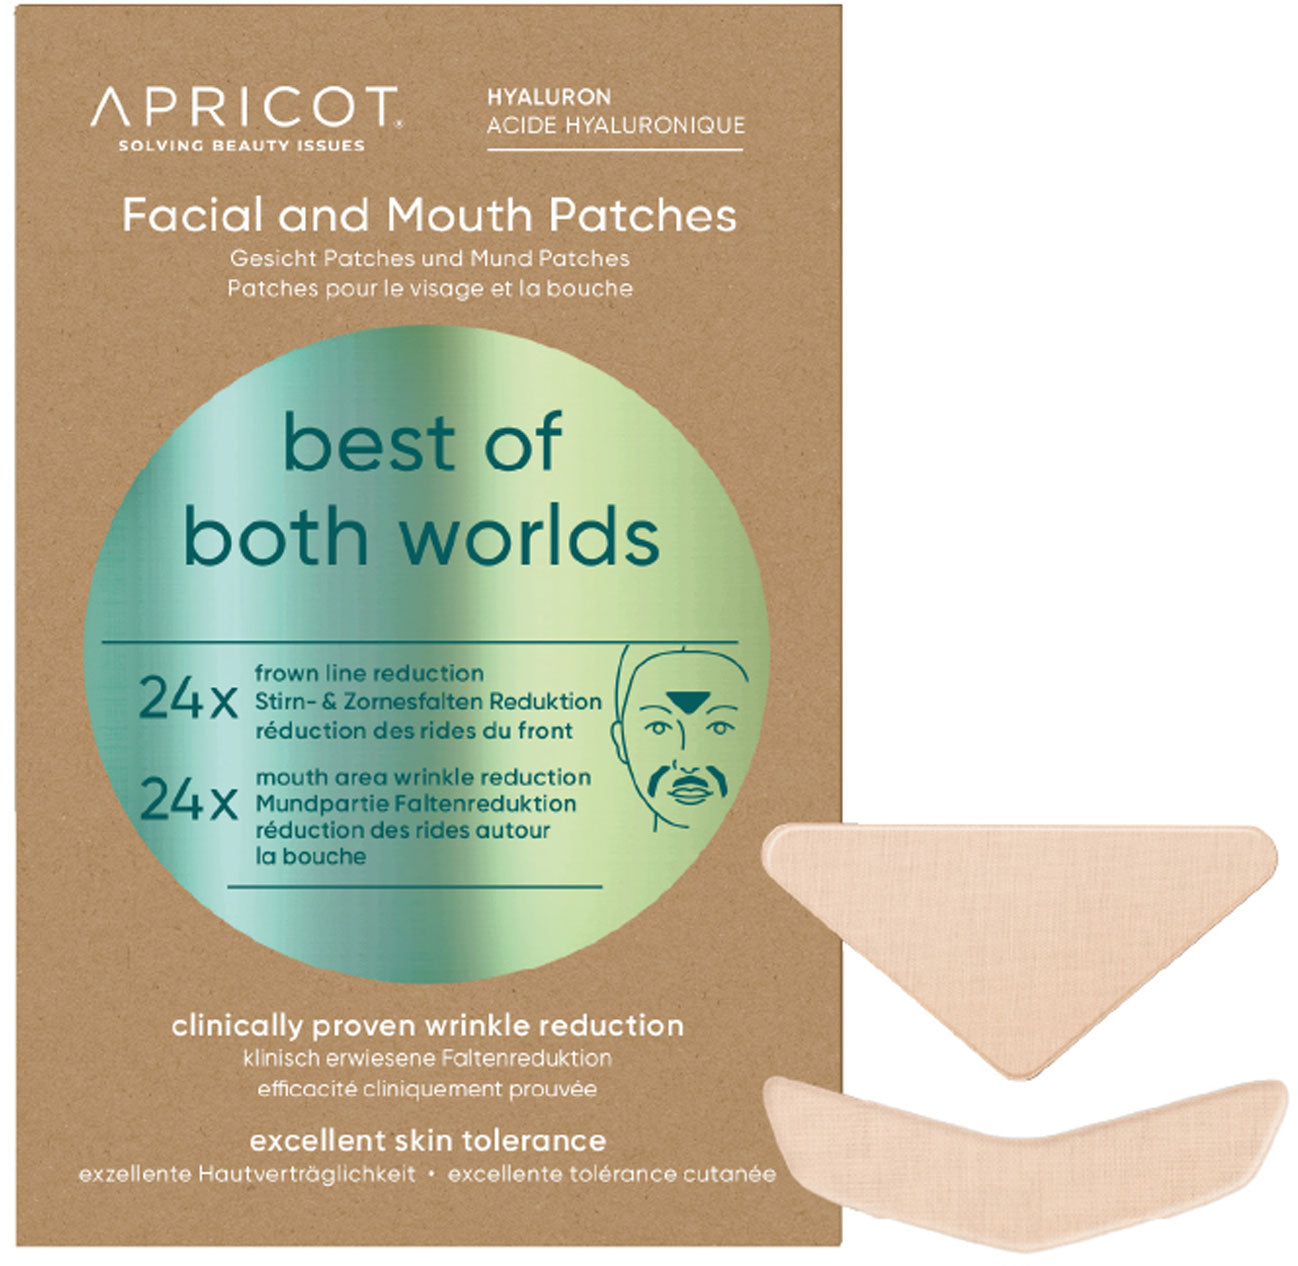 mini facial and mouth patches hyaluron multipack “best of both worlds”